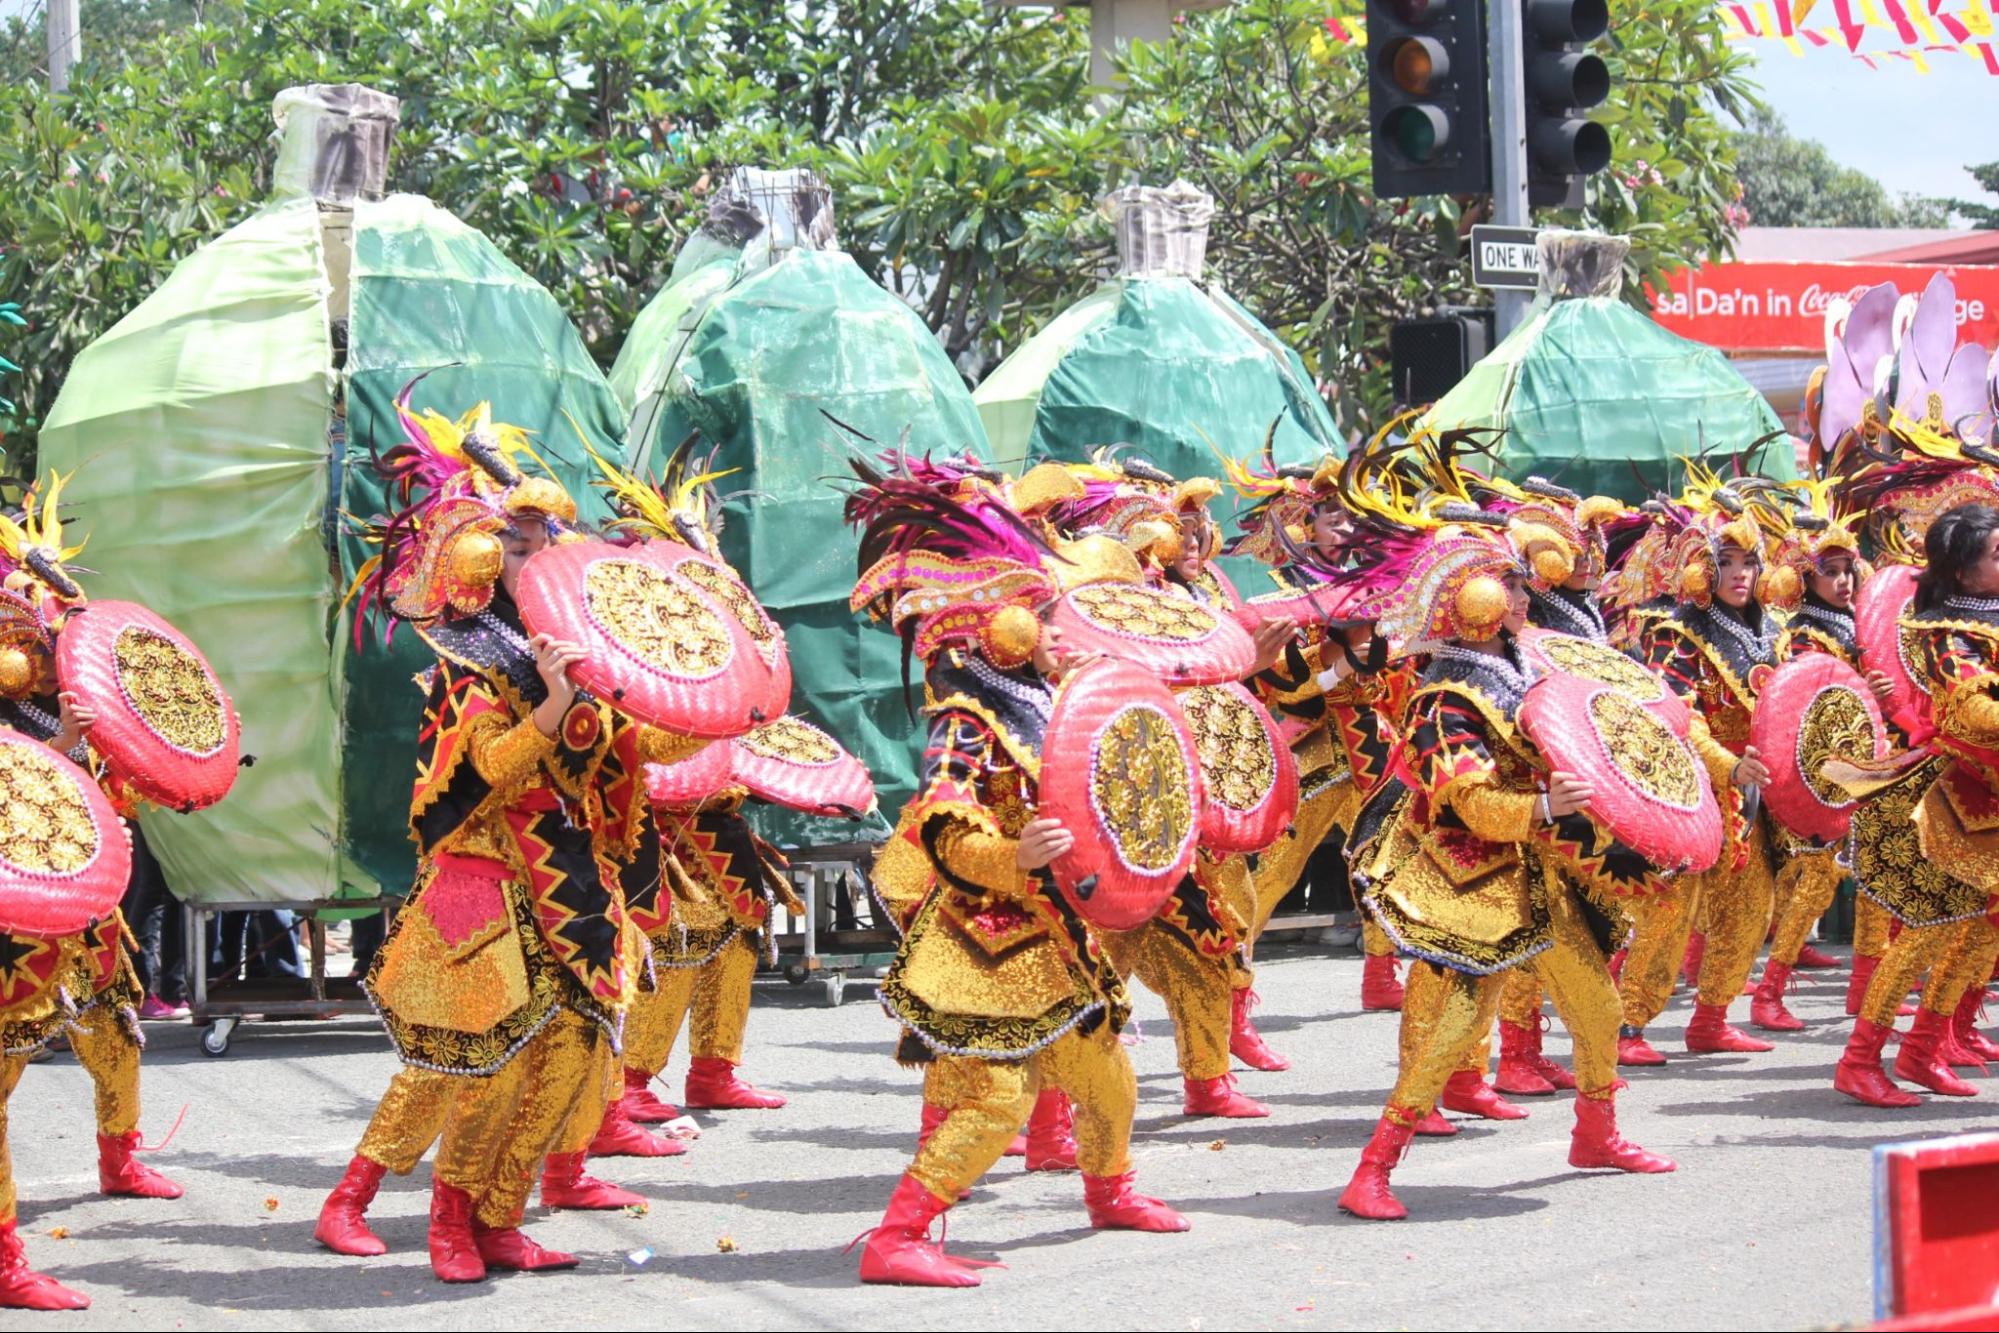 Lively performance as streetdancers dance to the rythm of the drums in Davao